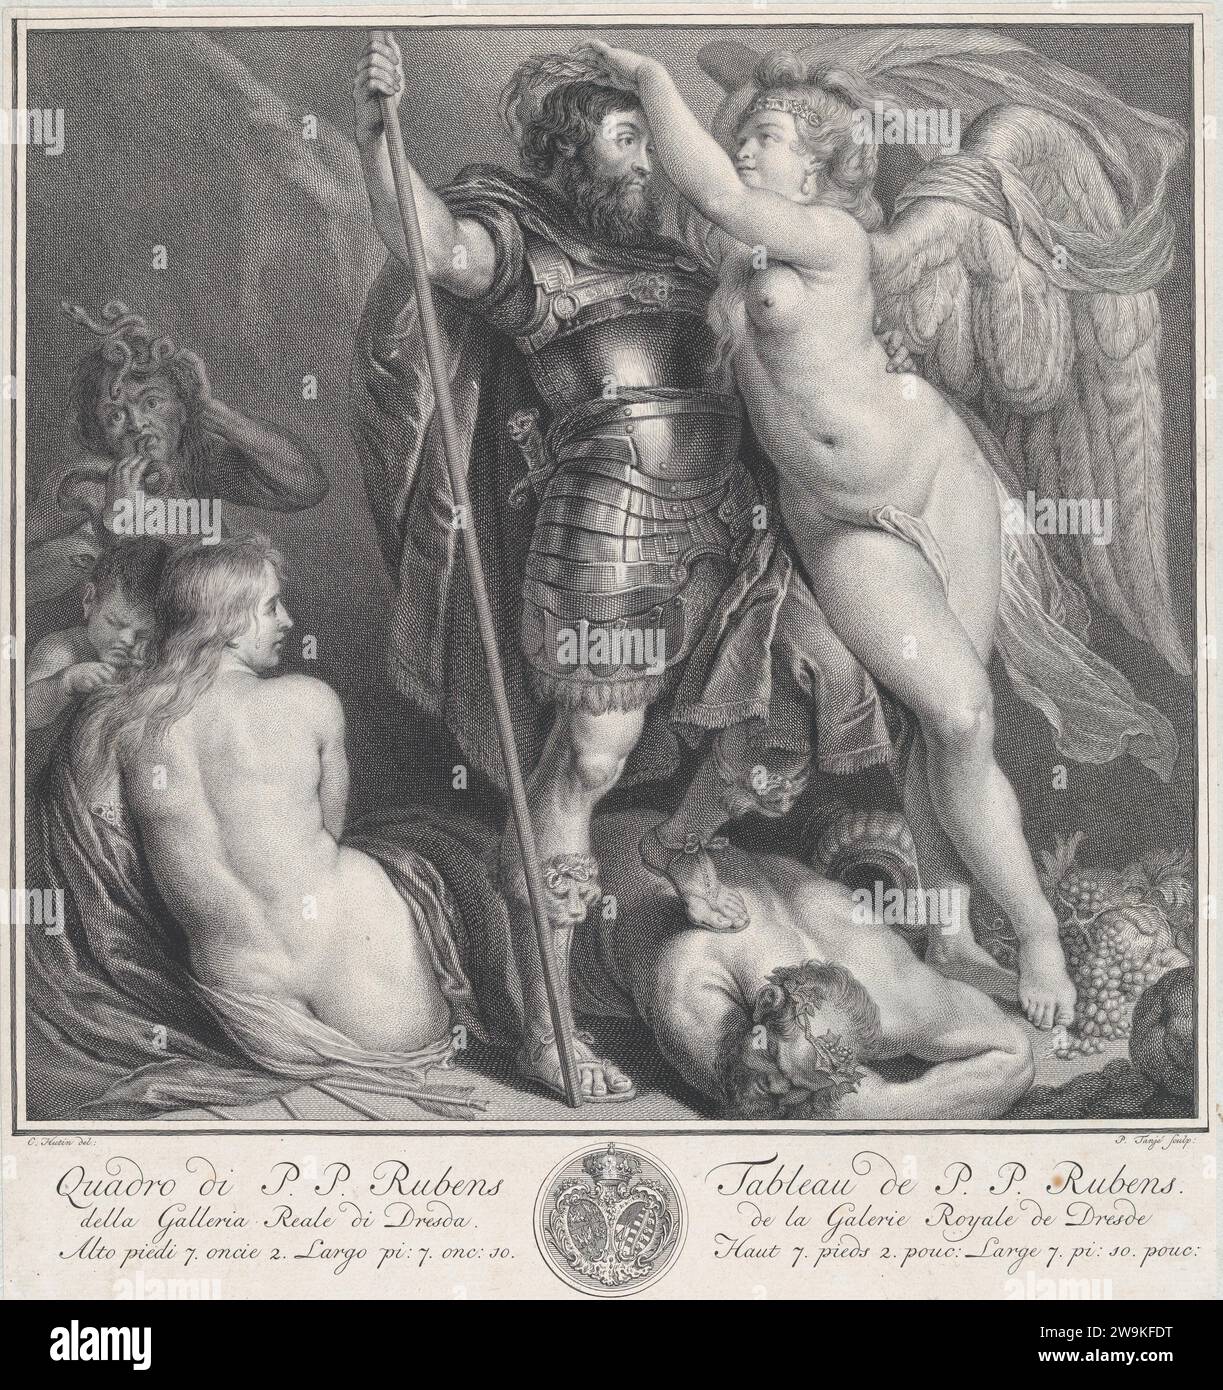 Hero crowned by Victory, who places a laurel wreath on his head, Venus and Cupid at left, Envy at left in the background, Silenus on the ground, under the hero's foot 1951 by Peter Paul Rubens Stock Photo